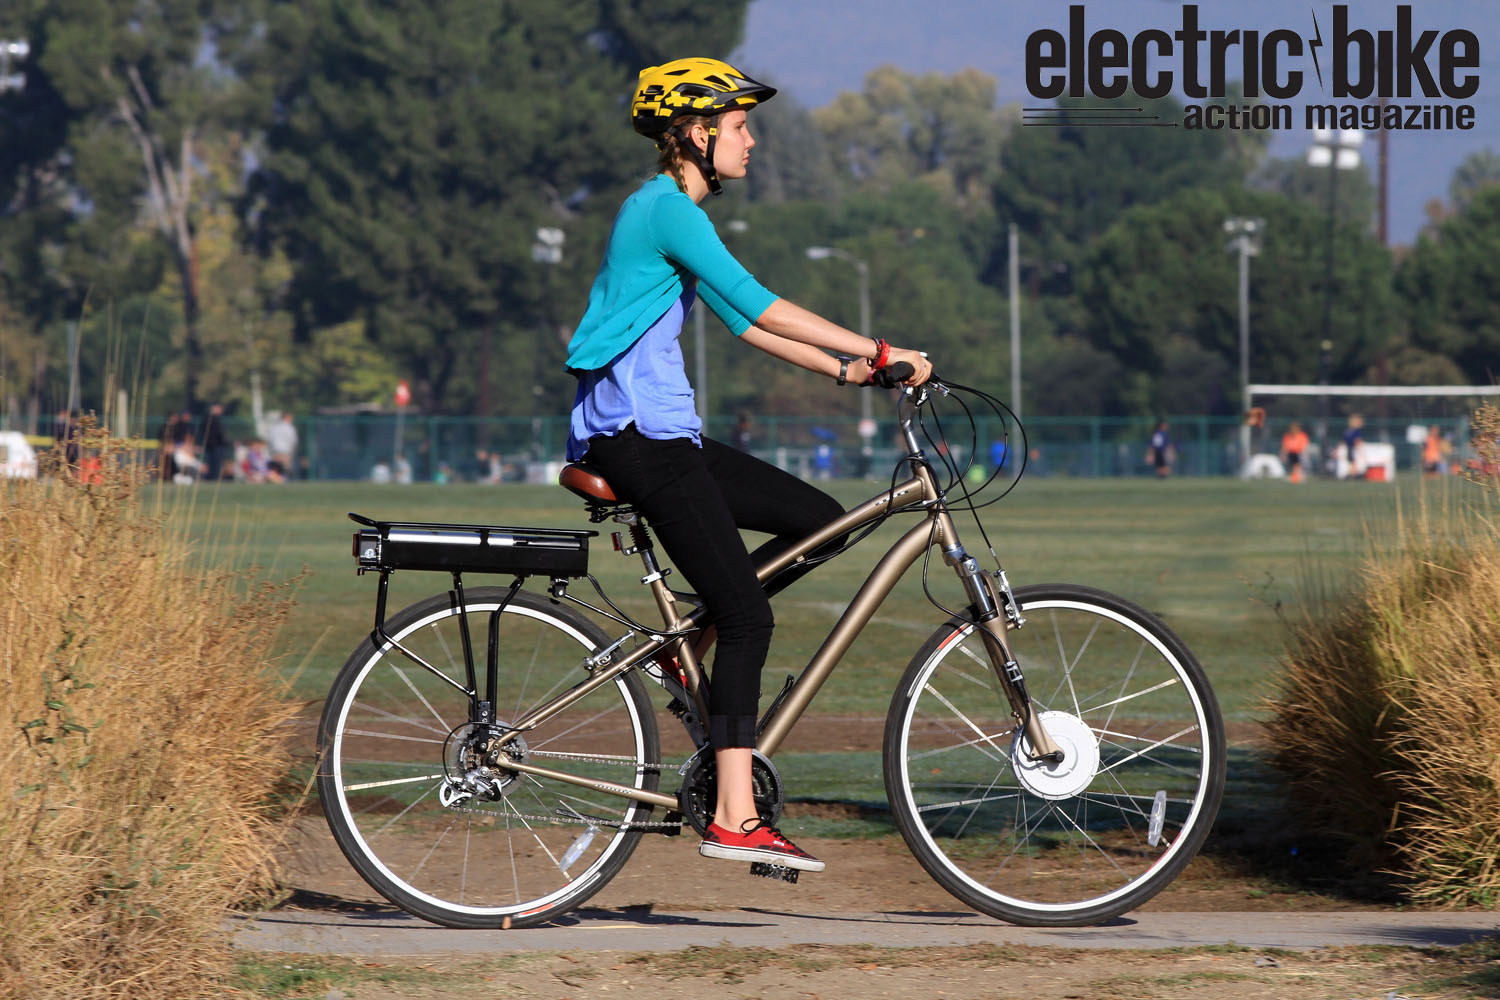 electric conversion kits for bicycles